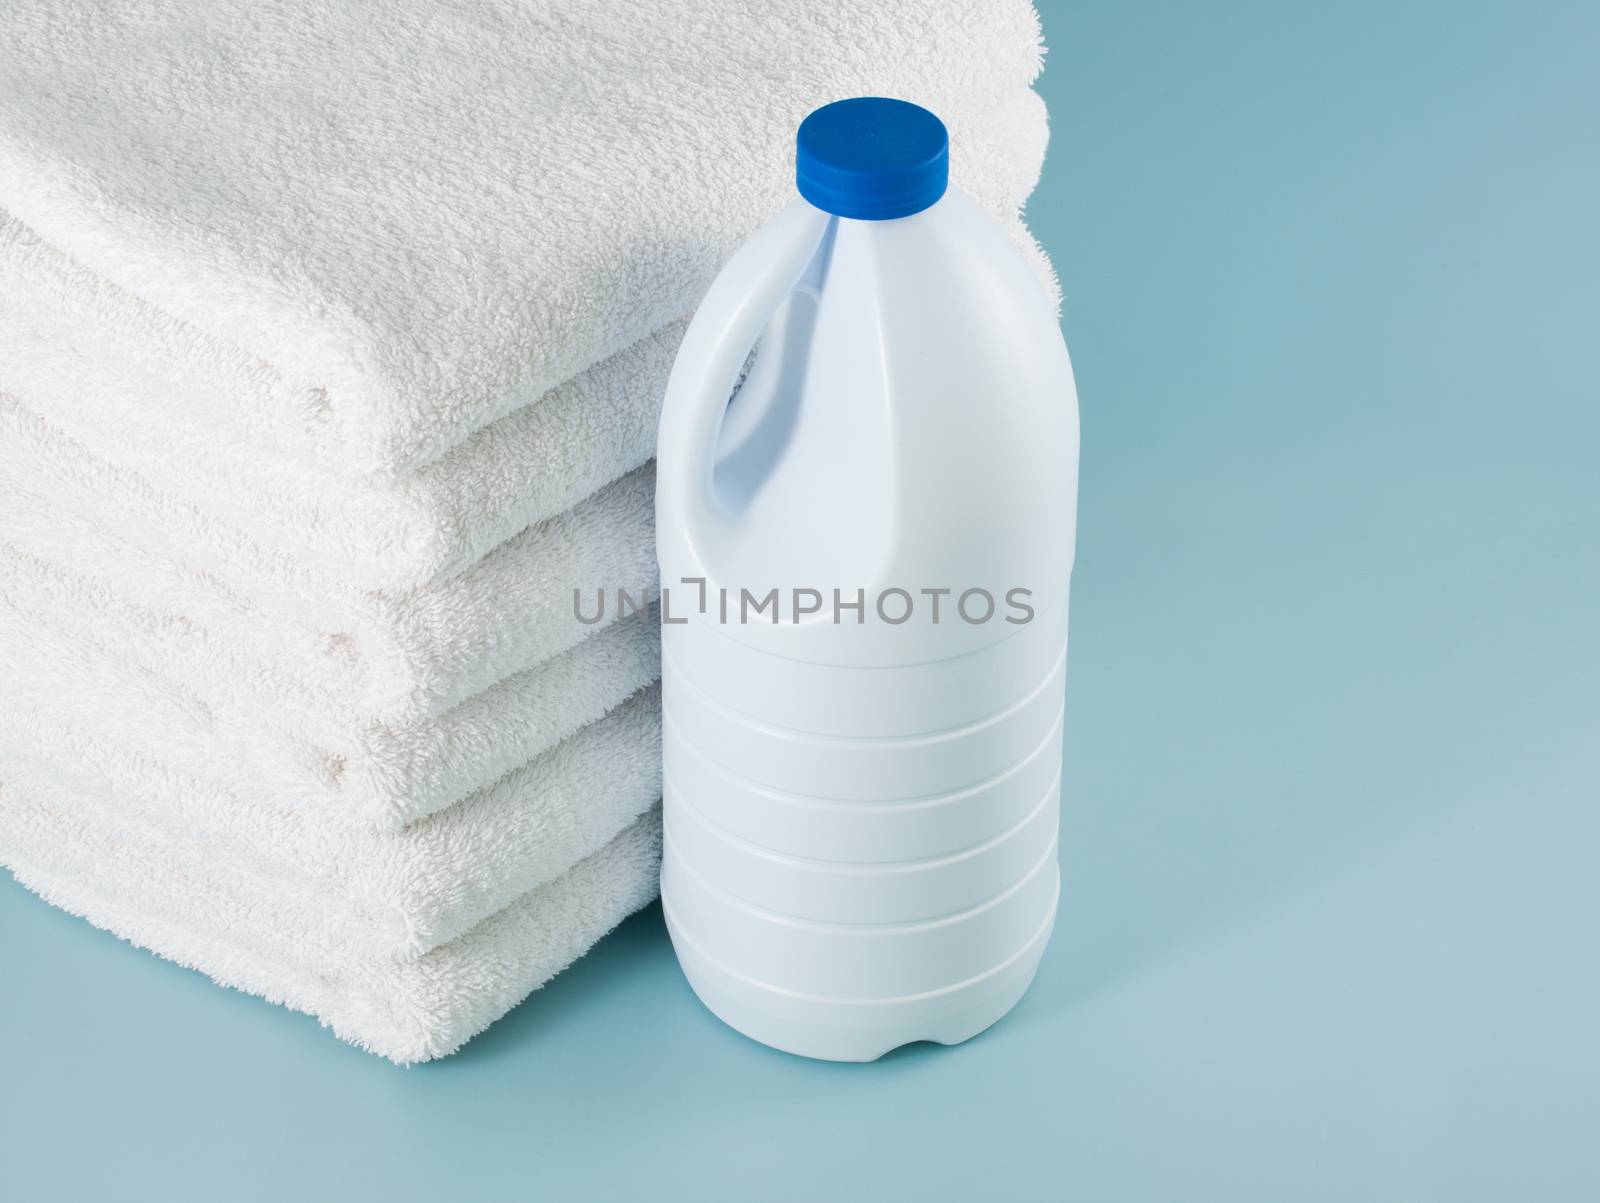 Laundry white bleach bottle place beside stack of bath towel